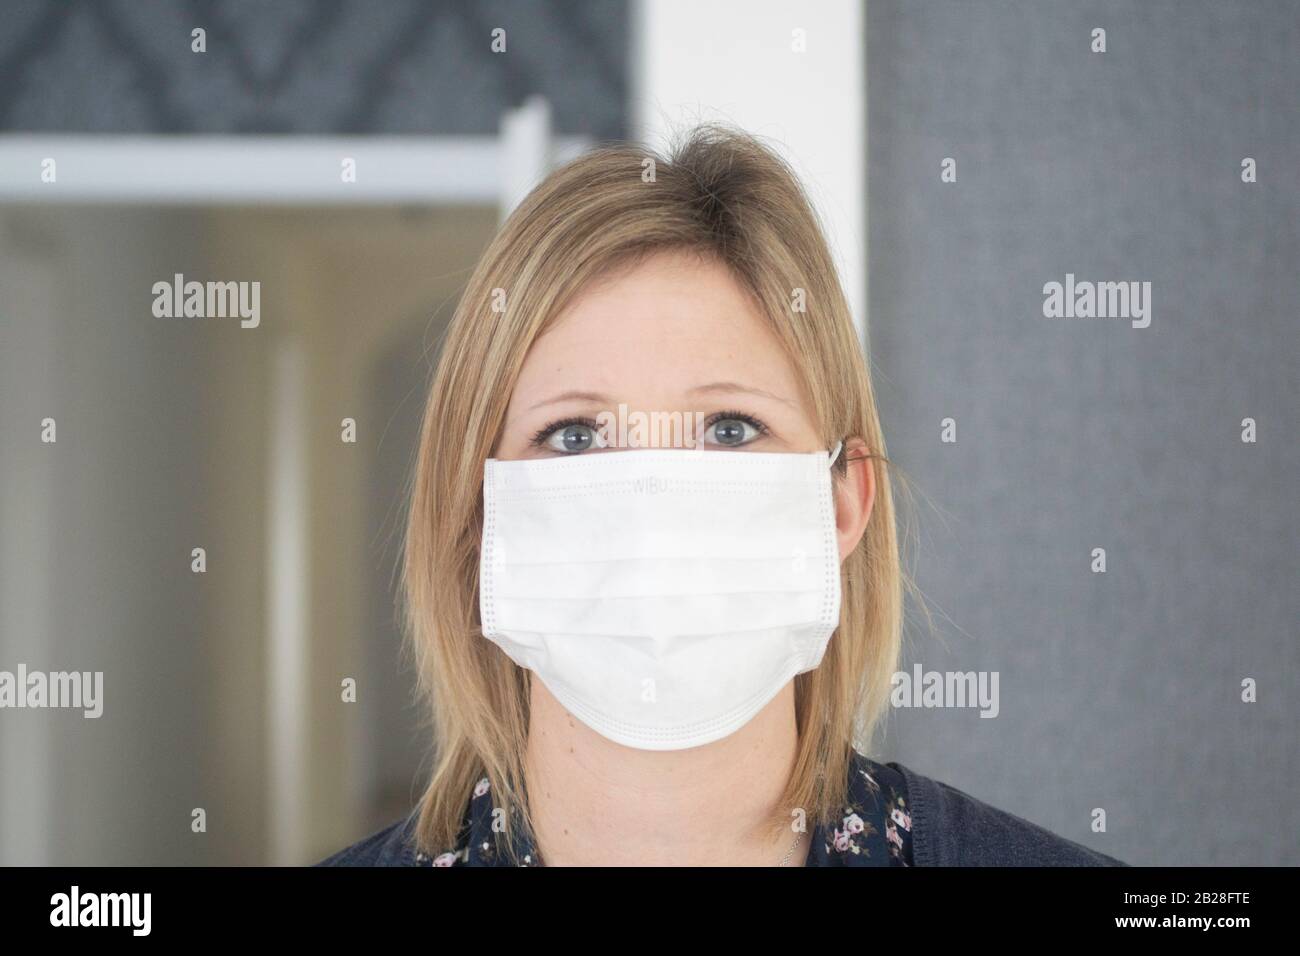 European blond women with a mask to protect herself Stock Photo